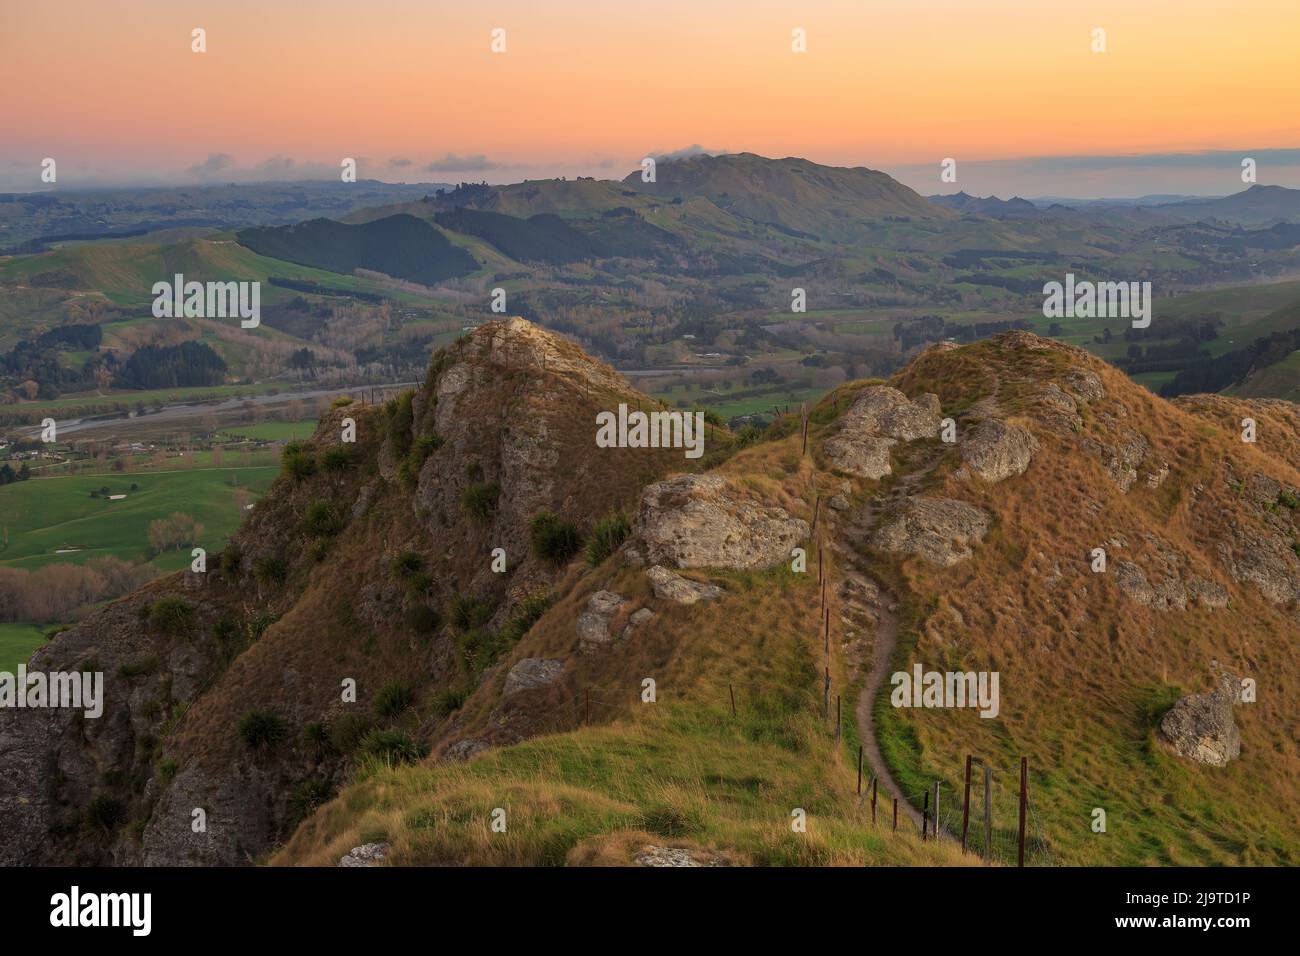 View from the summit of Te Mata Peak, a mountain in the Hawke's Bay region of New Zealand, at sunset, looking down at the Tukituki River Stock Photo